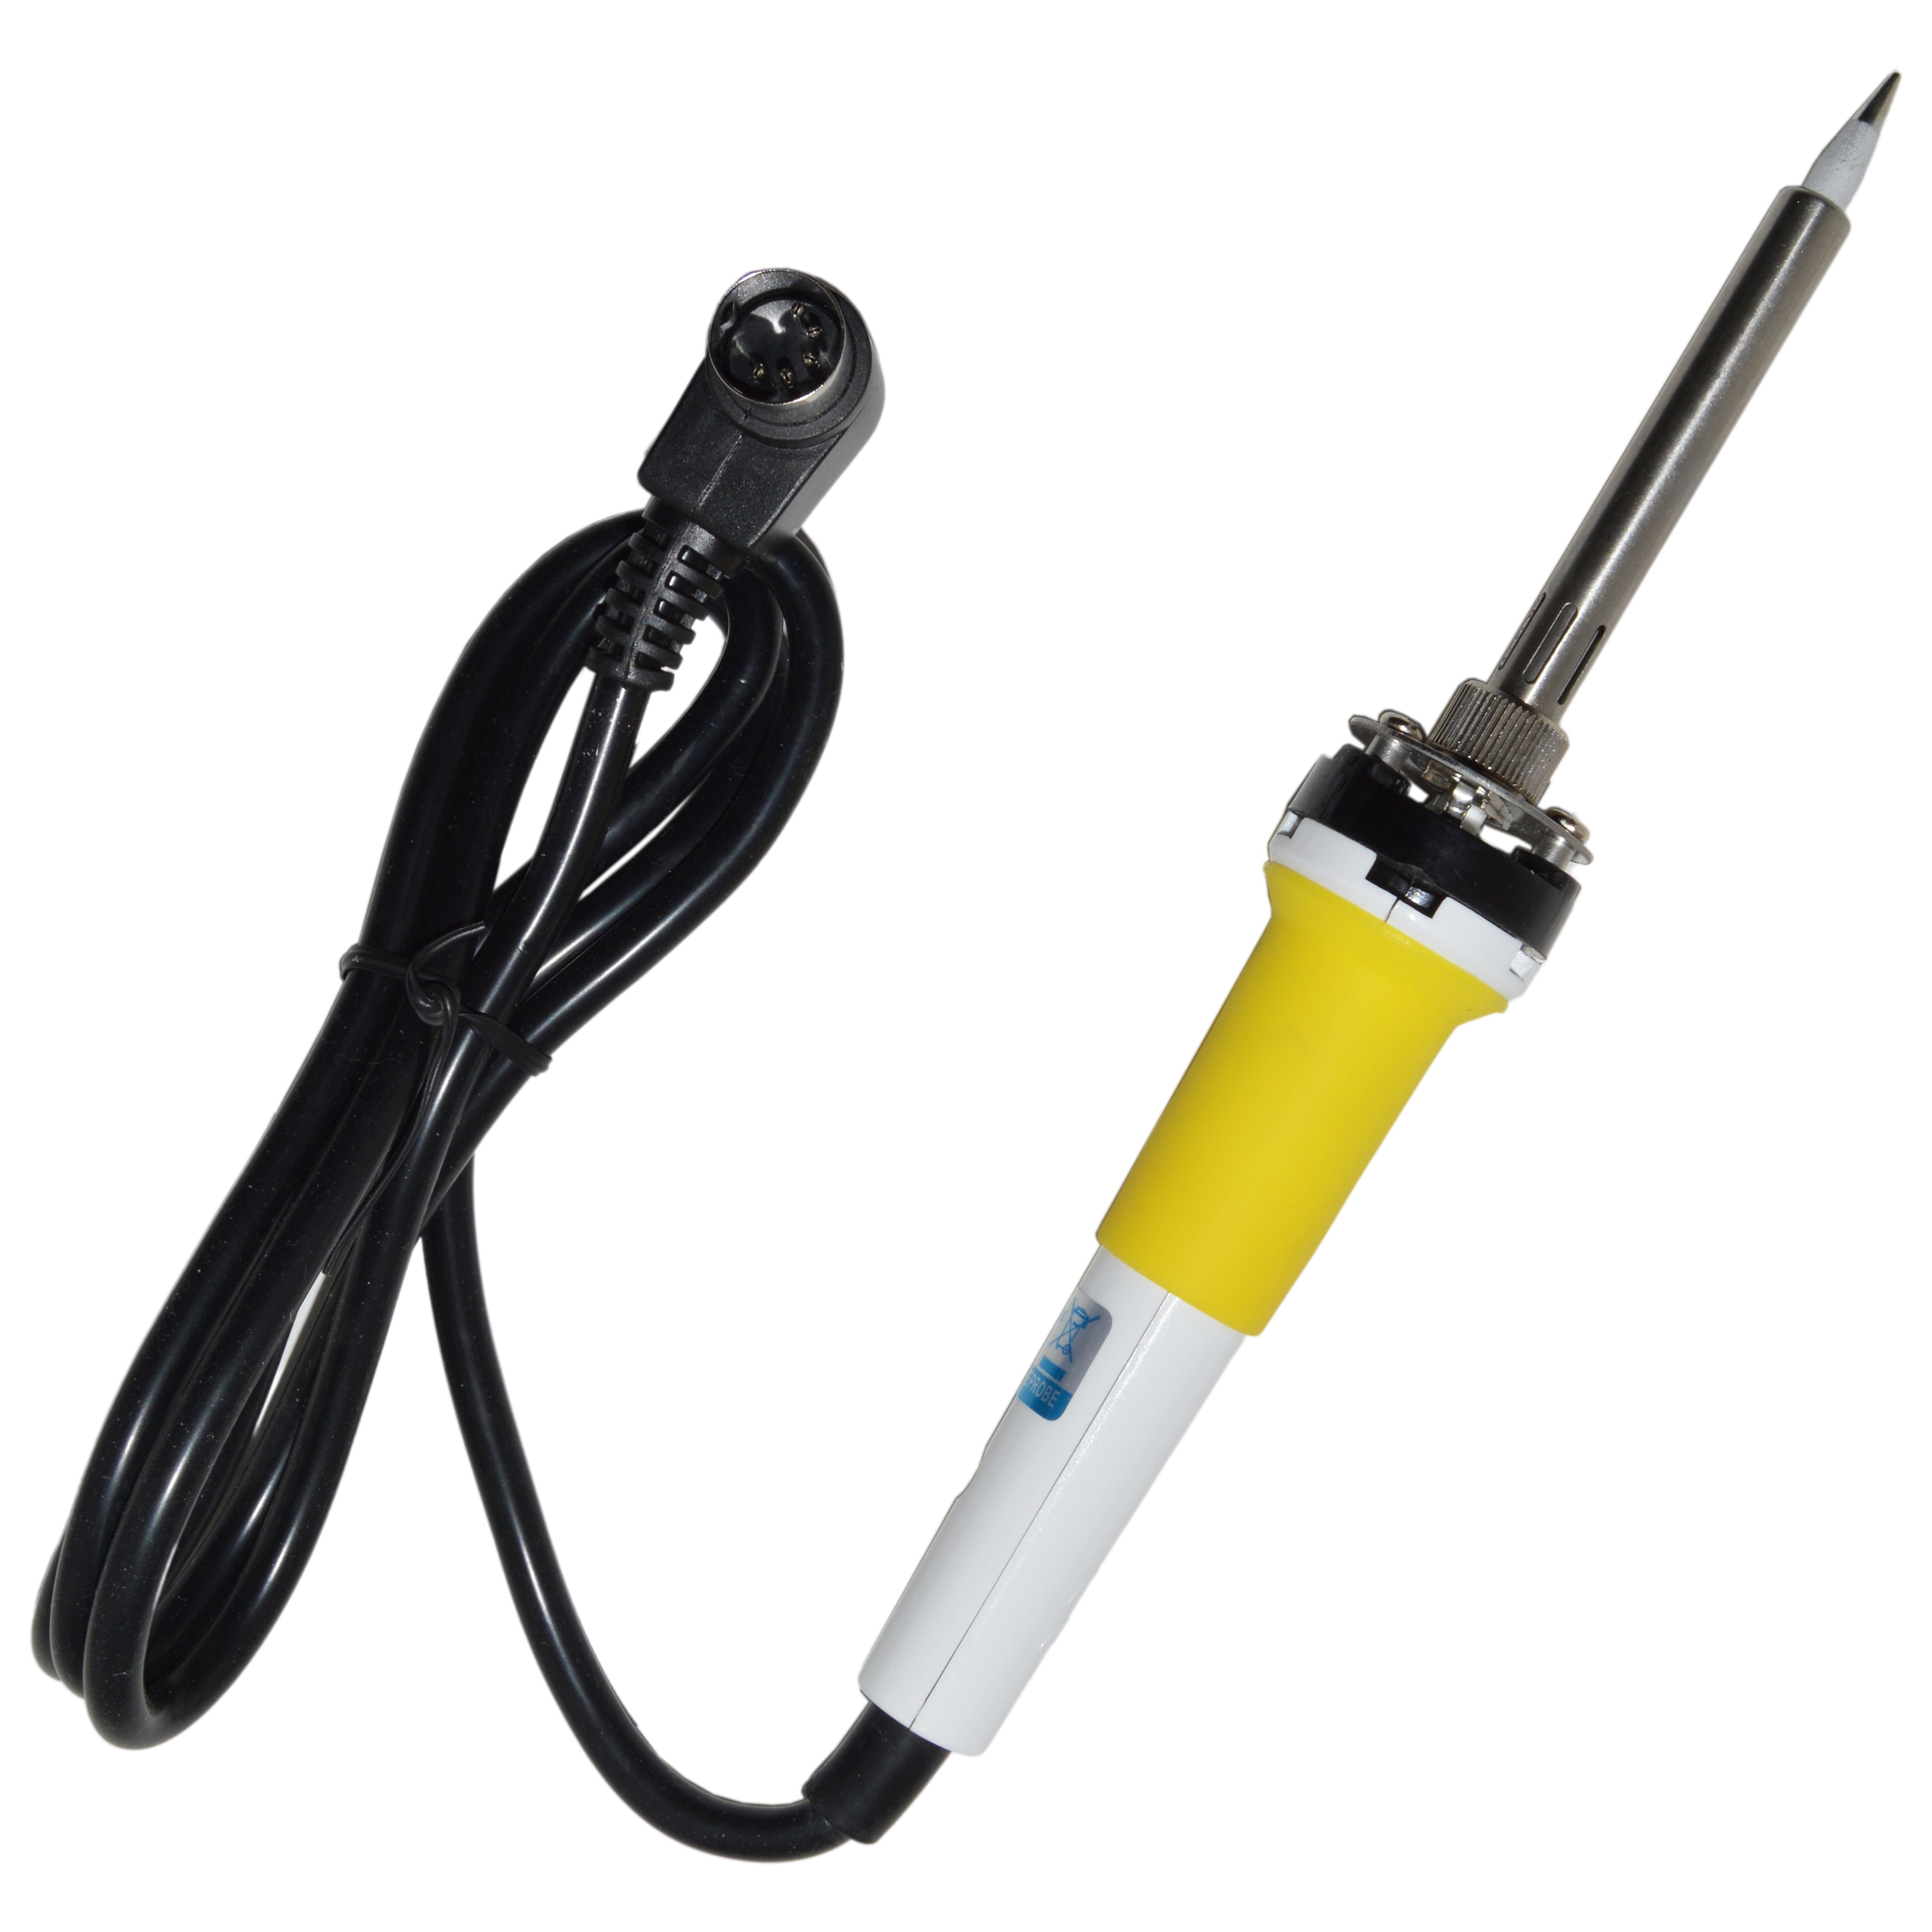 24V 48W Max Replacement Soldering Iron for 0603ZD929C 